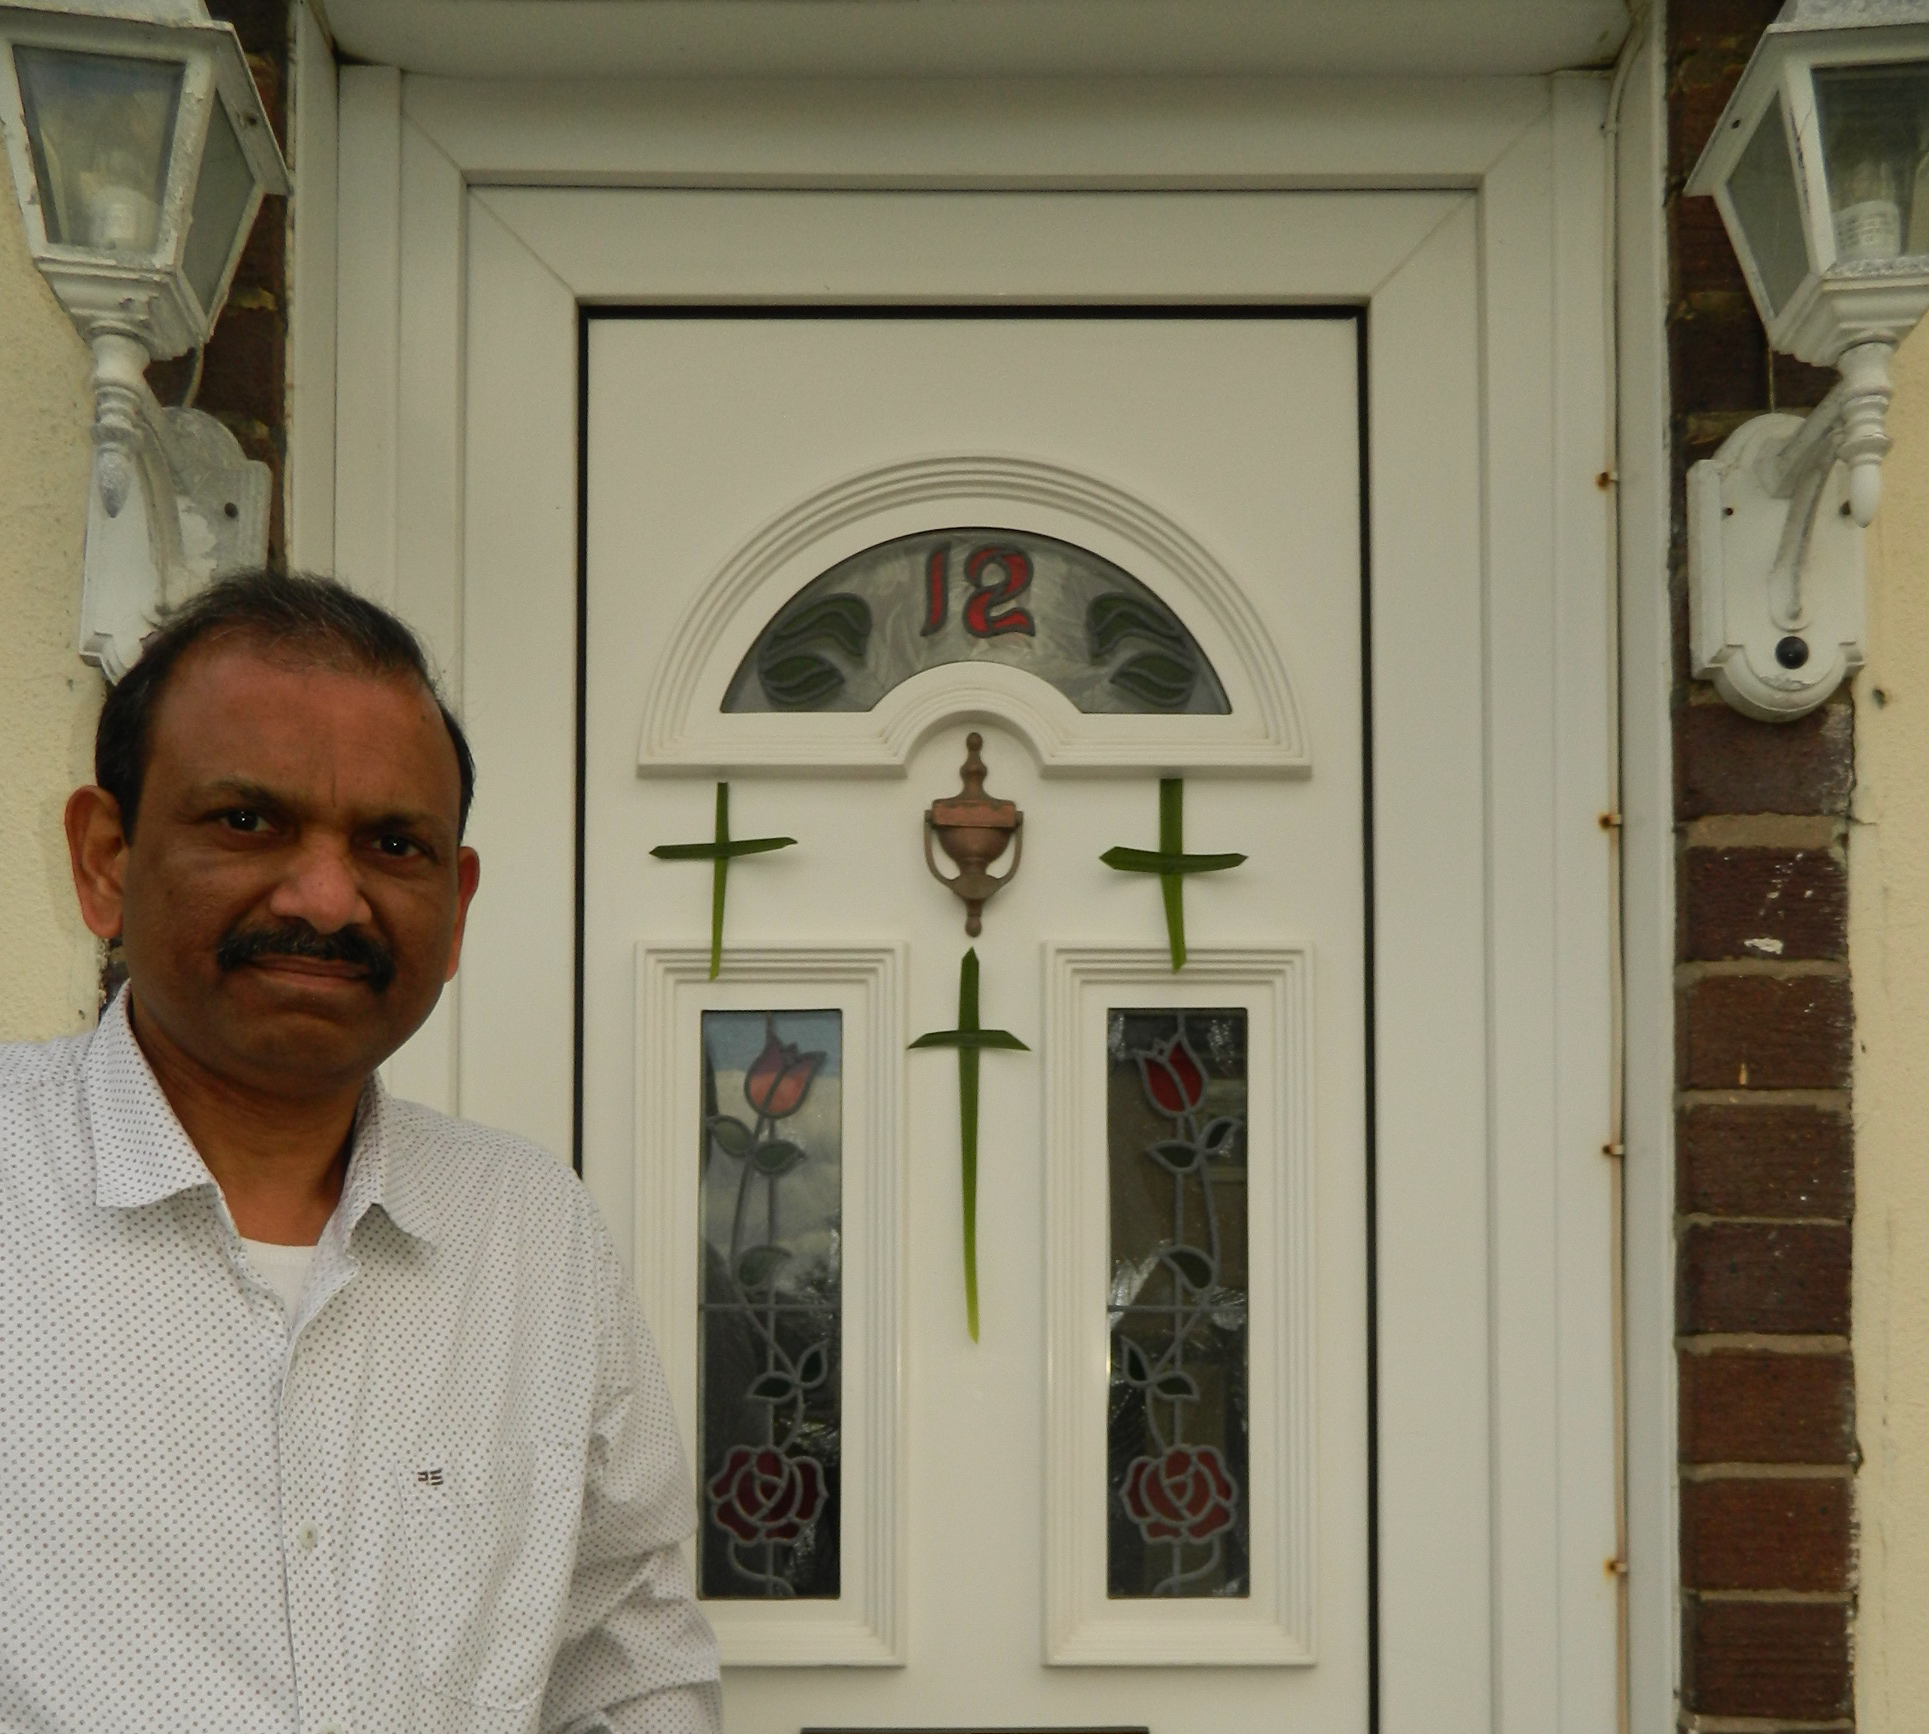 Hang a green cross on your door this Palm Sunday